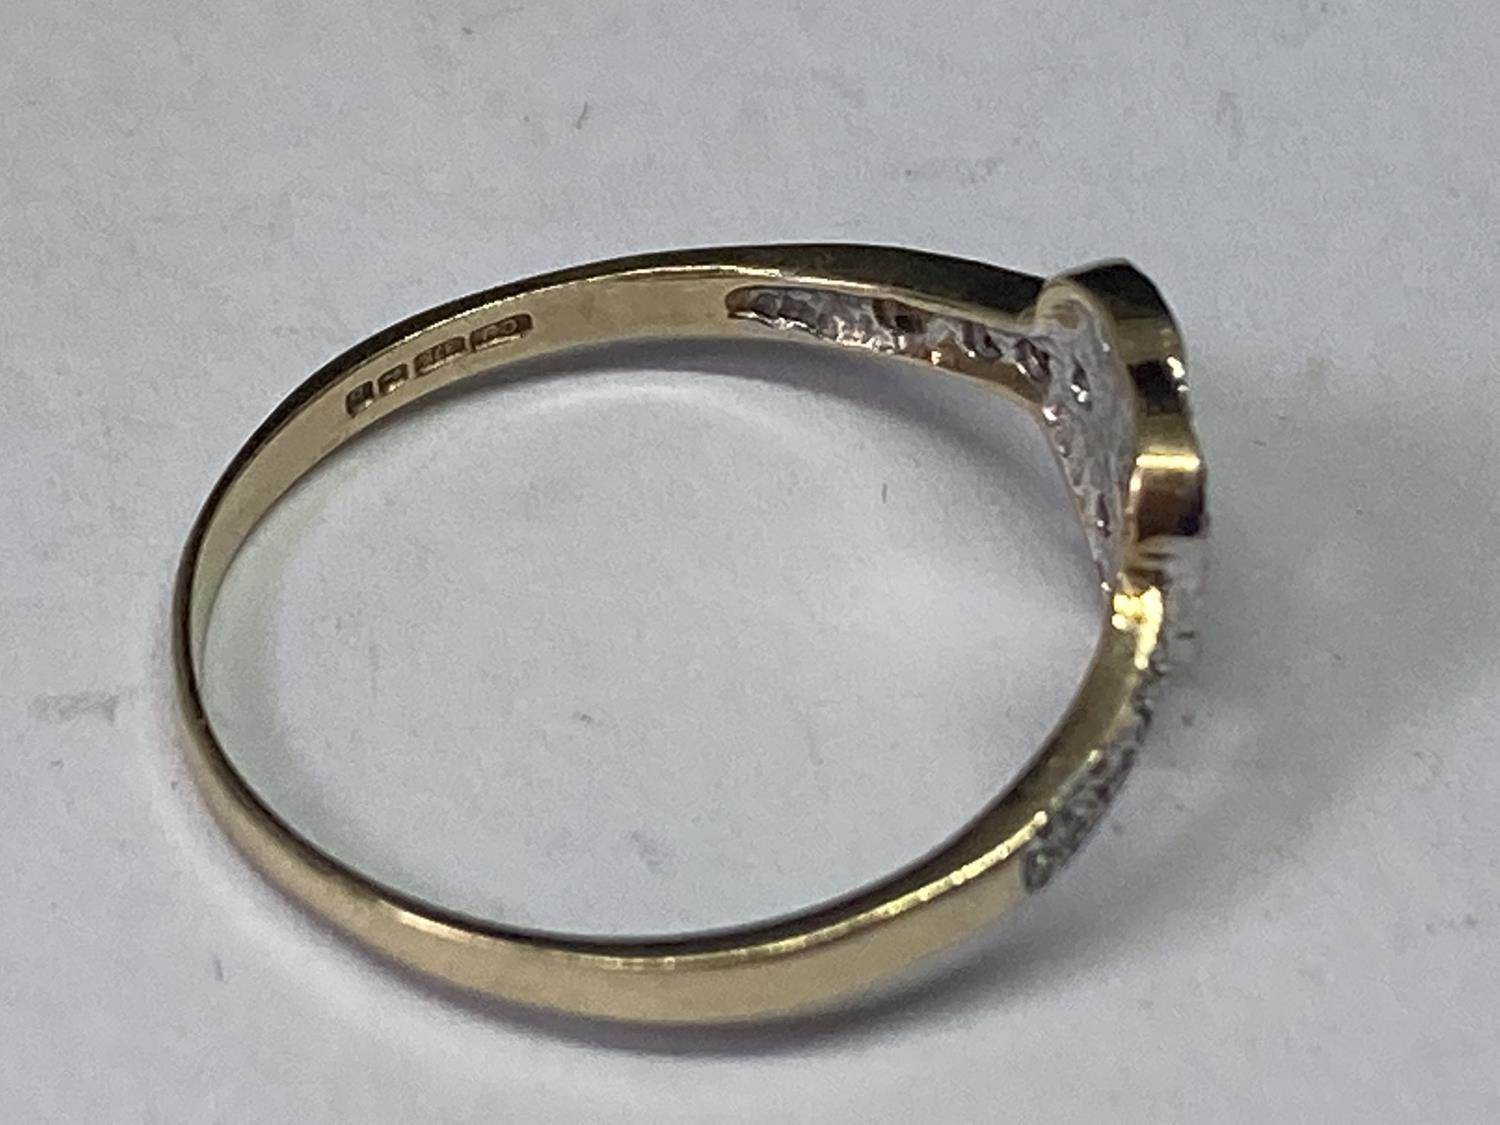 A 9 CARAT GOLD RING WITH DIAMONDS IN A HEART DESIGN SIZE R - Image 2 of 3